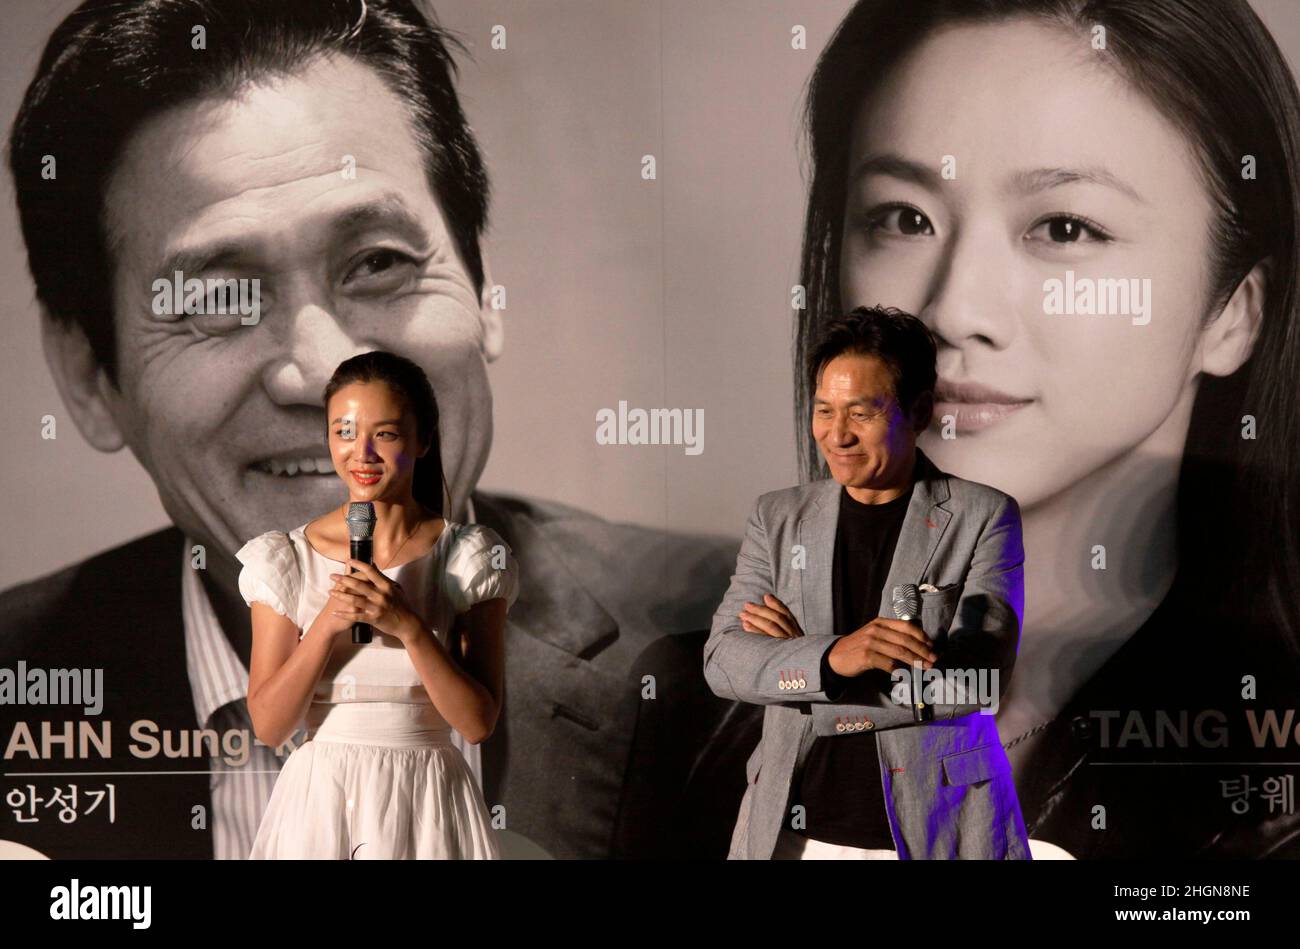 October 5, 2012 - Busan, South Korea : Actress Tang Wei(left) and actor An Sung Ki attend open talk during the 17th Busan International Film Festival Open Event at the BIFF Village. (Ryu Seung-il / Polaris) Stock Photo